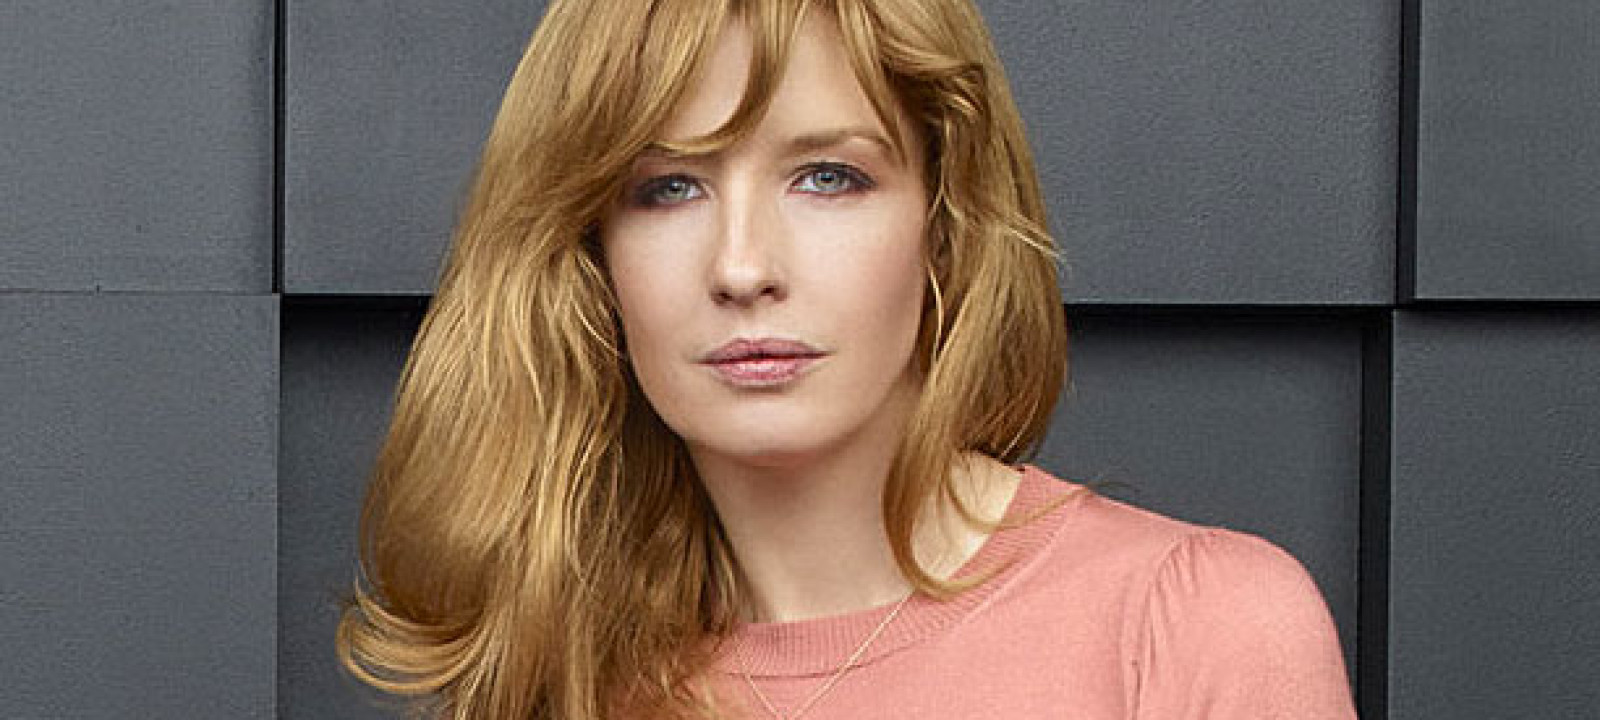 Kelly reilly pics